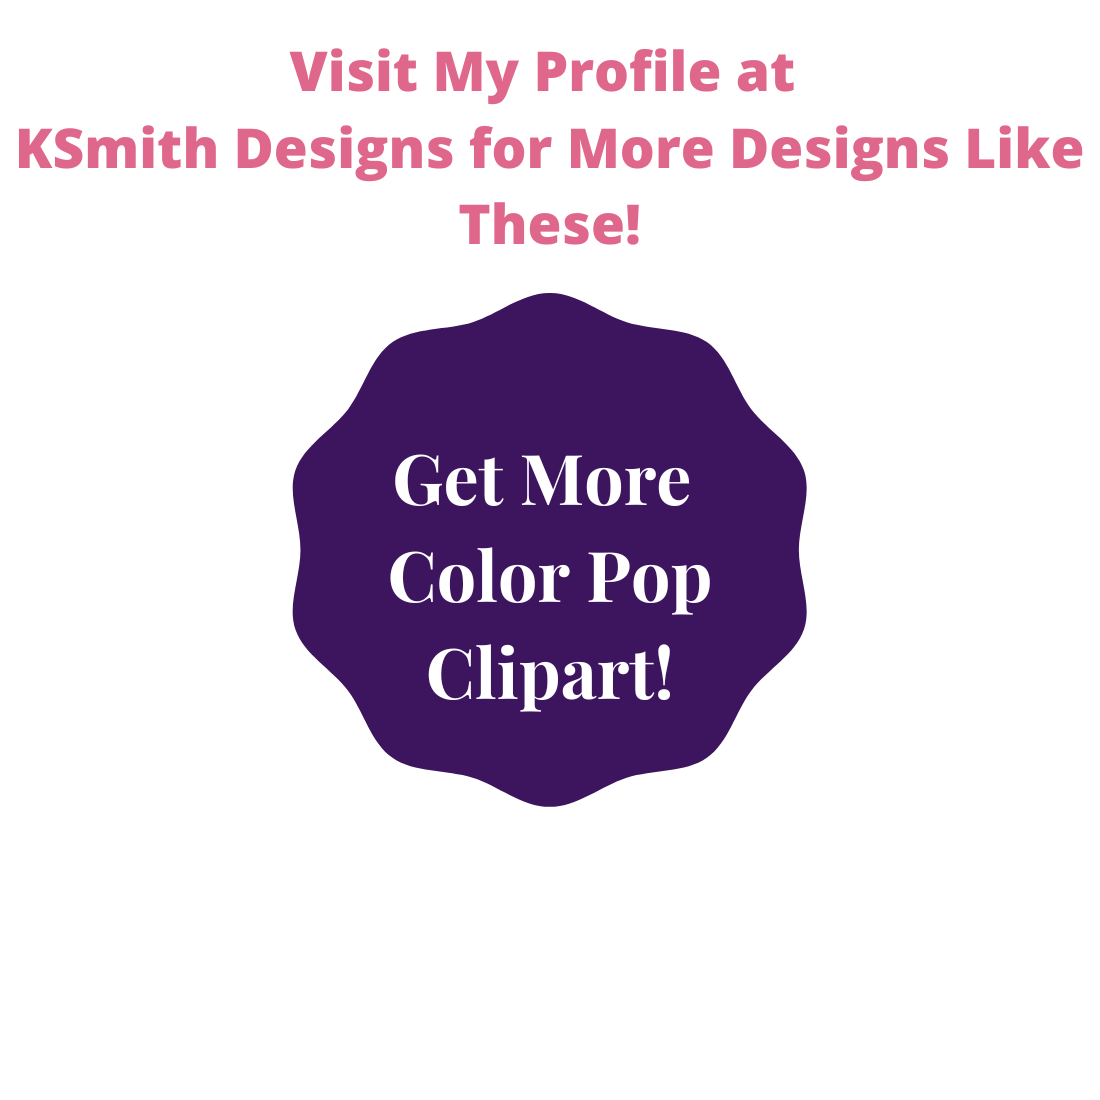 16 COLOR POP CLIPART IMAGES OF MAIL ICON preview image.